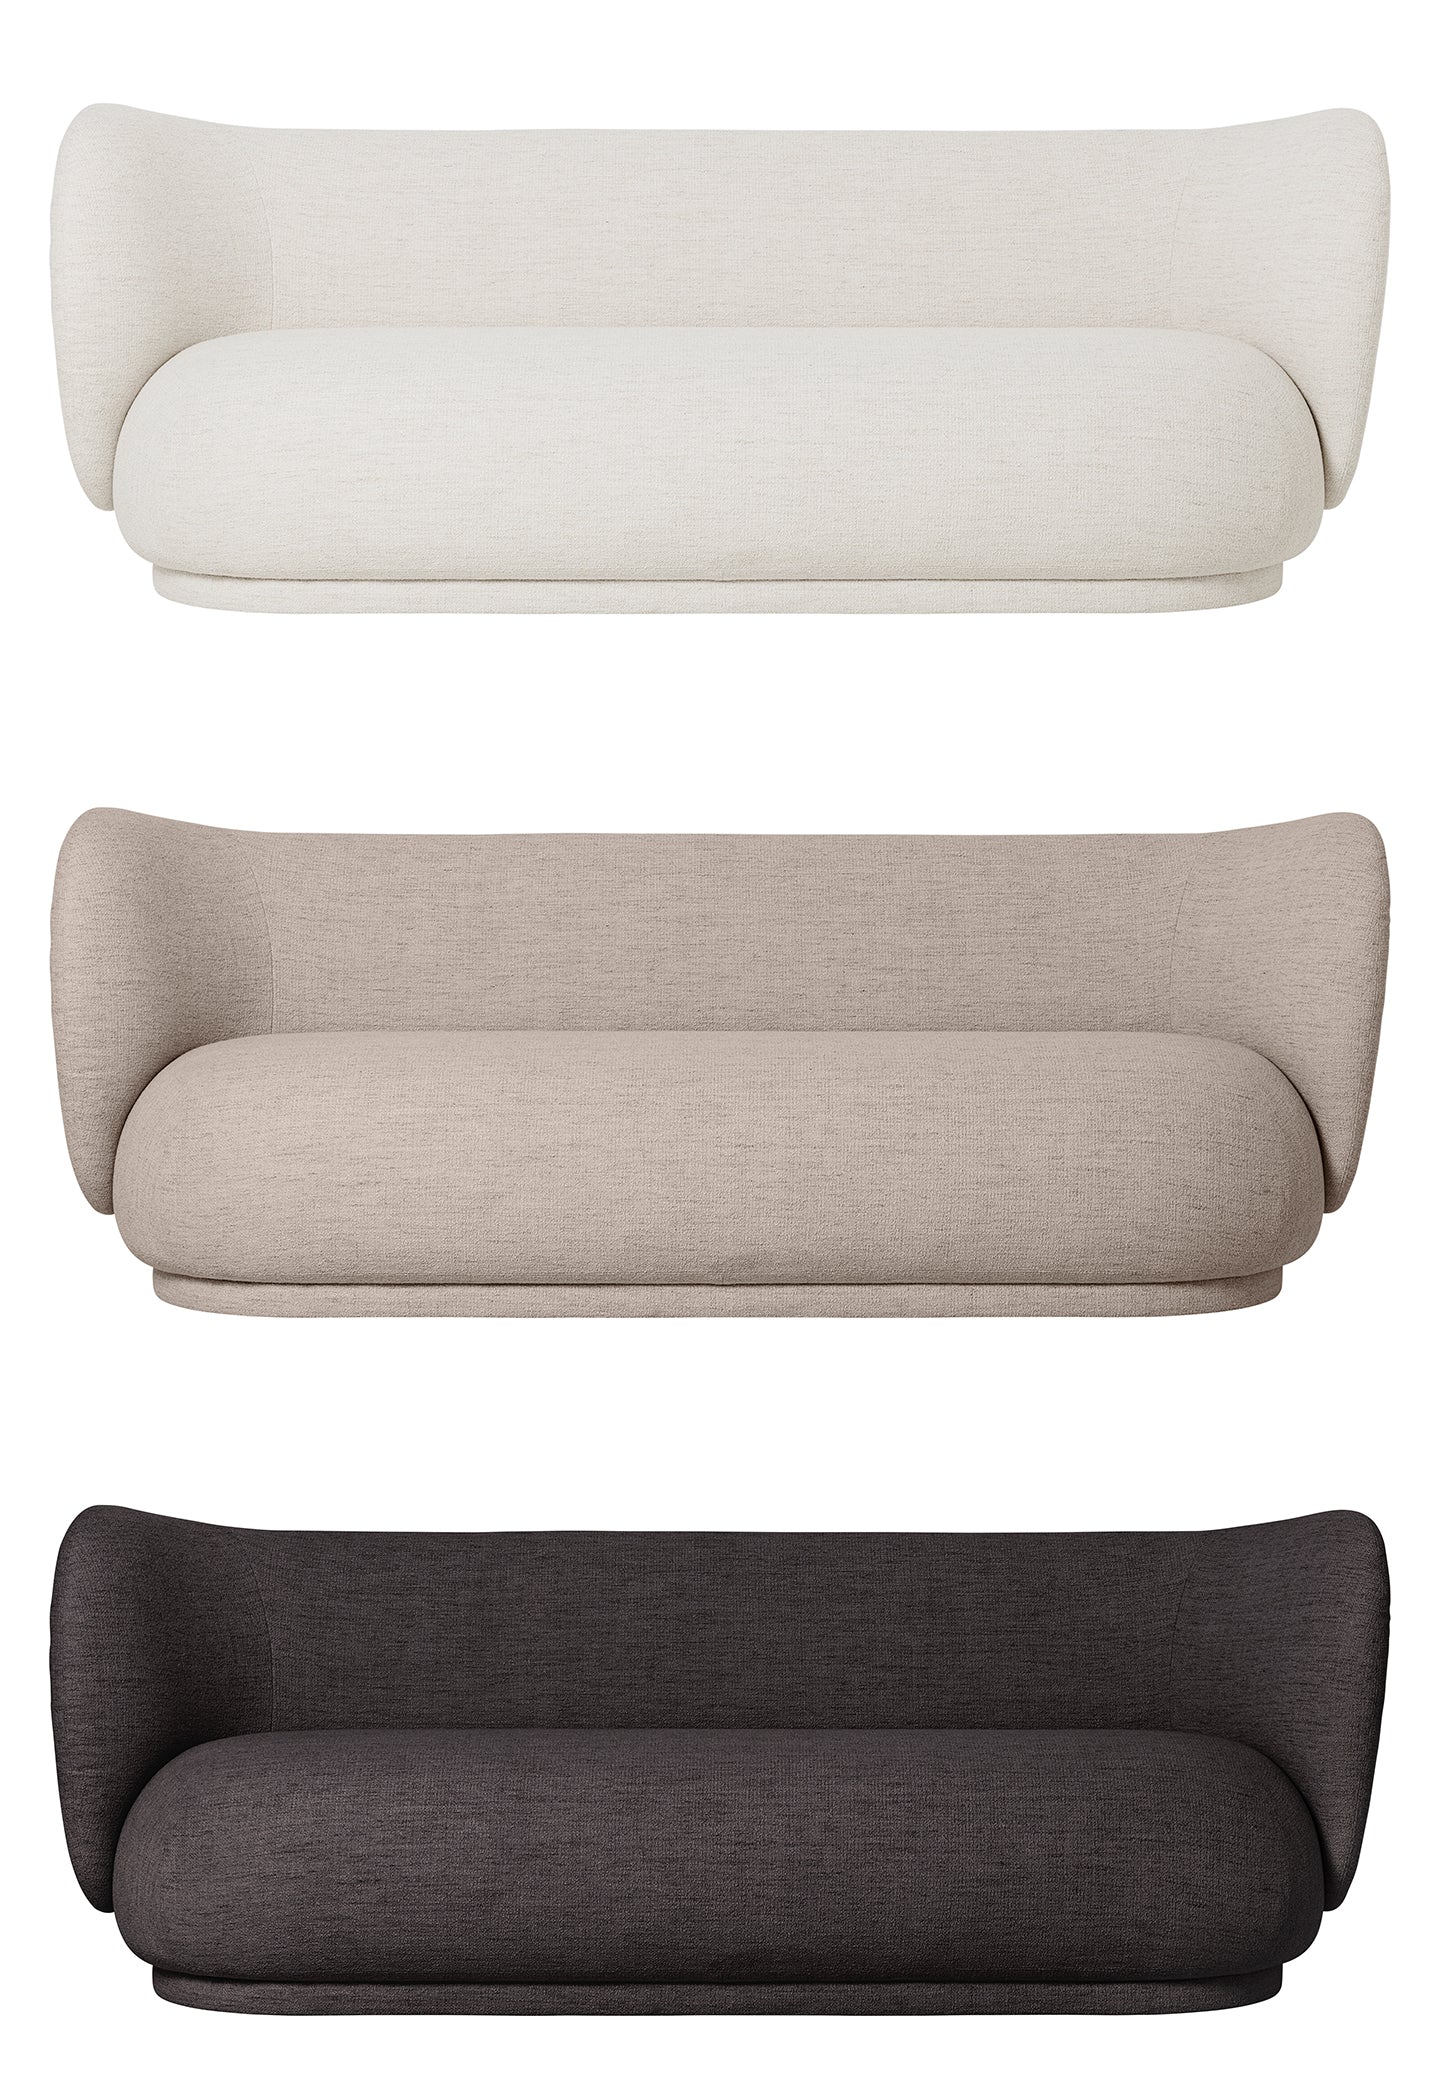 Sofa | 3 Seater Rico Couch | Bouclé fabric | Other Colours Available - Lifestory - ferm Living